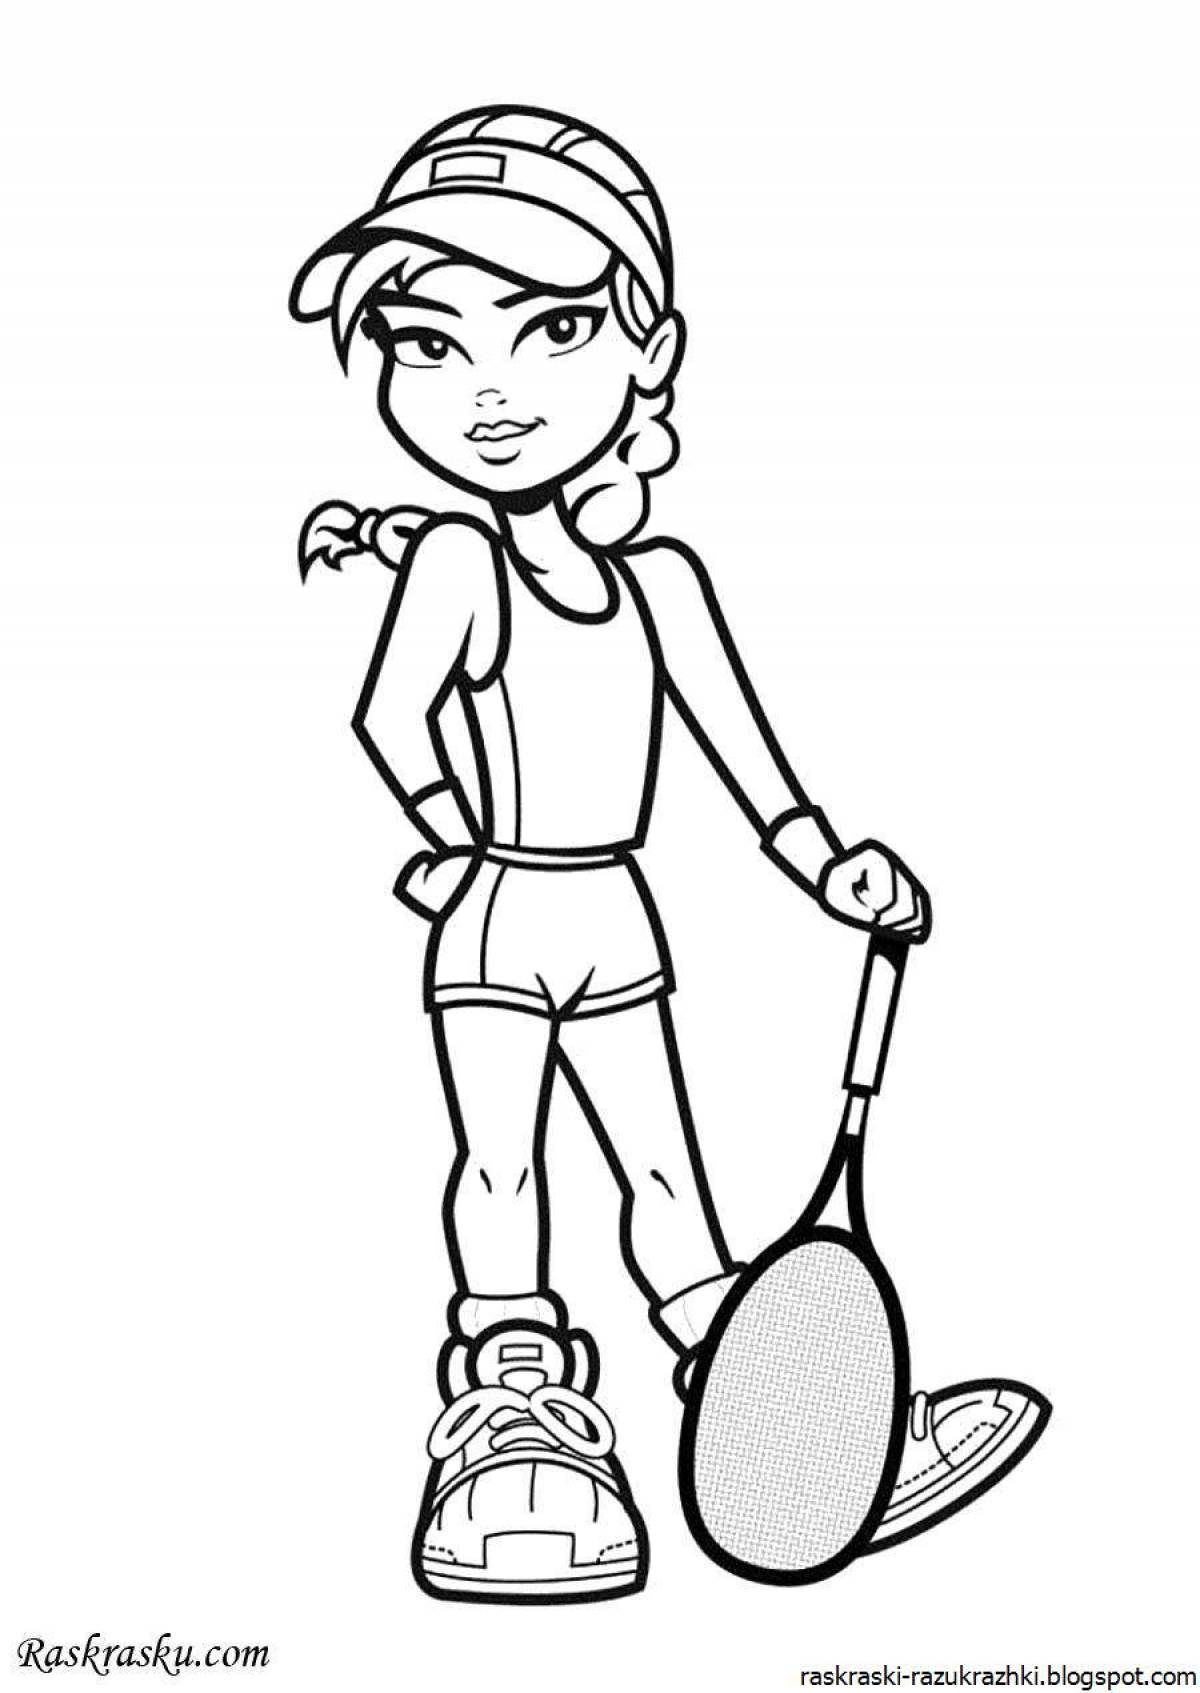 Playful krumpets coloring page